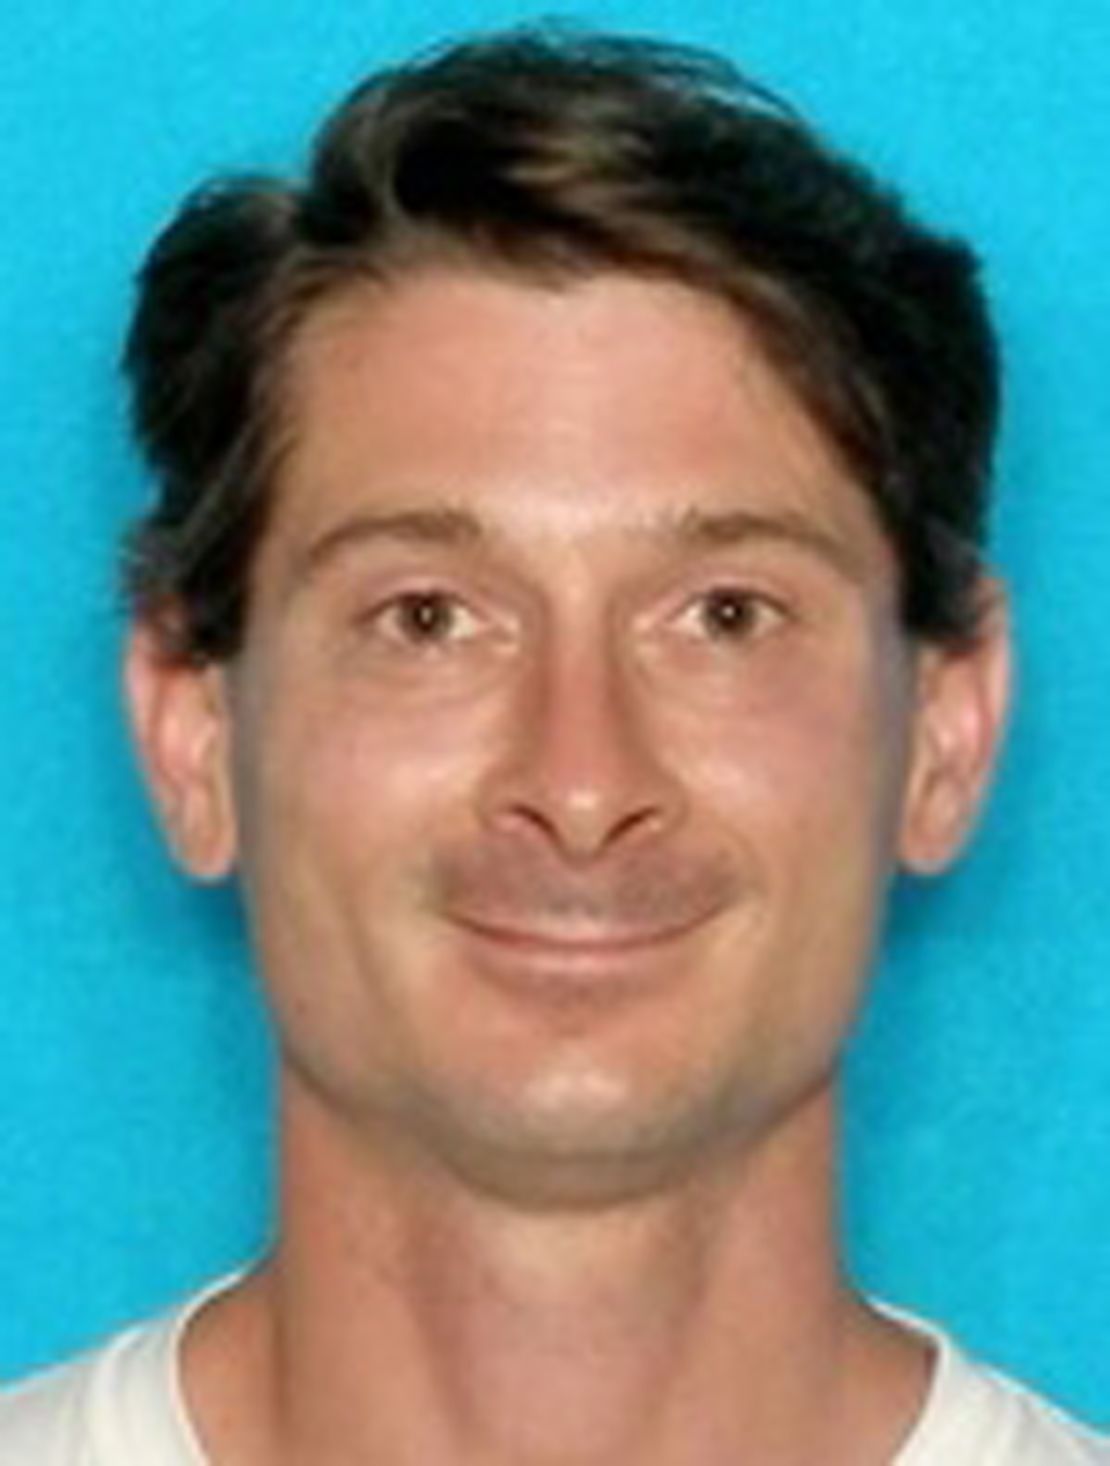 College Station police identified the dead suspect as 35-year-old Thomas Caffall of Bryan, Texas.